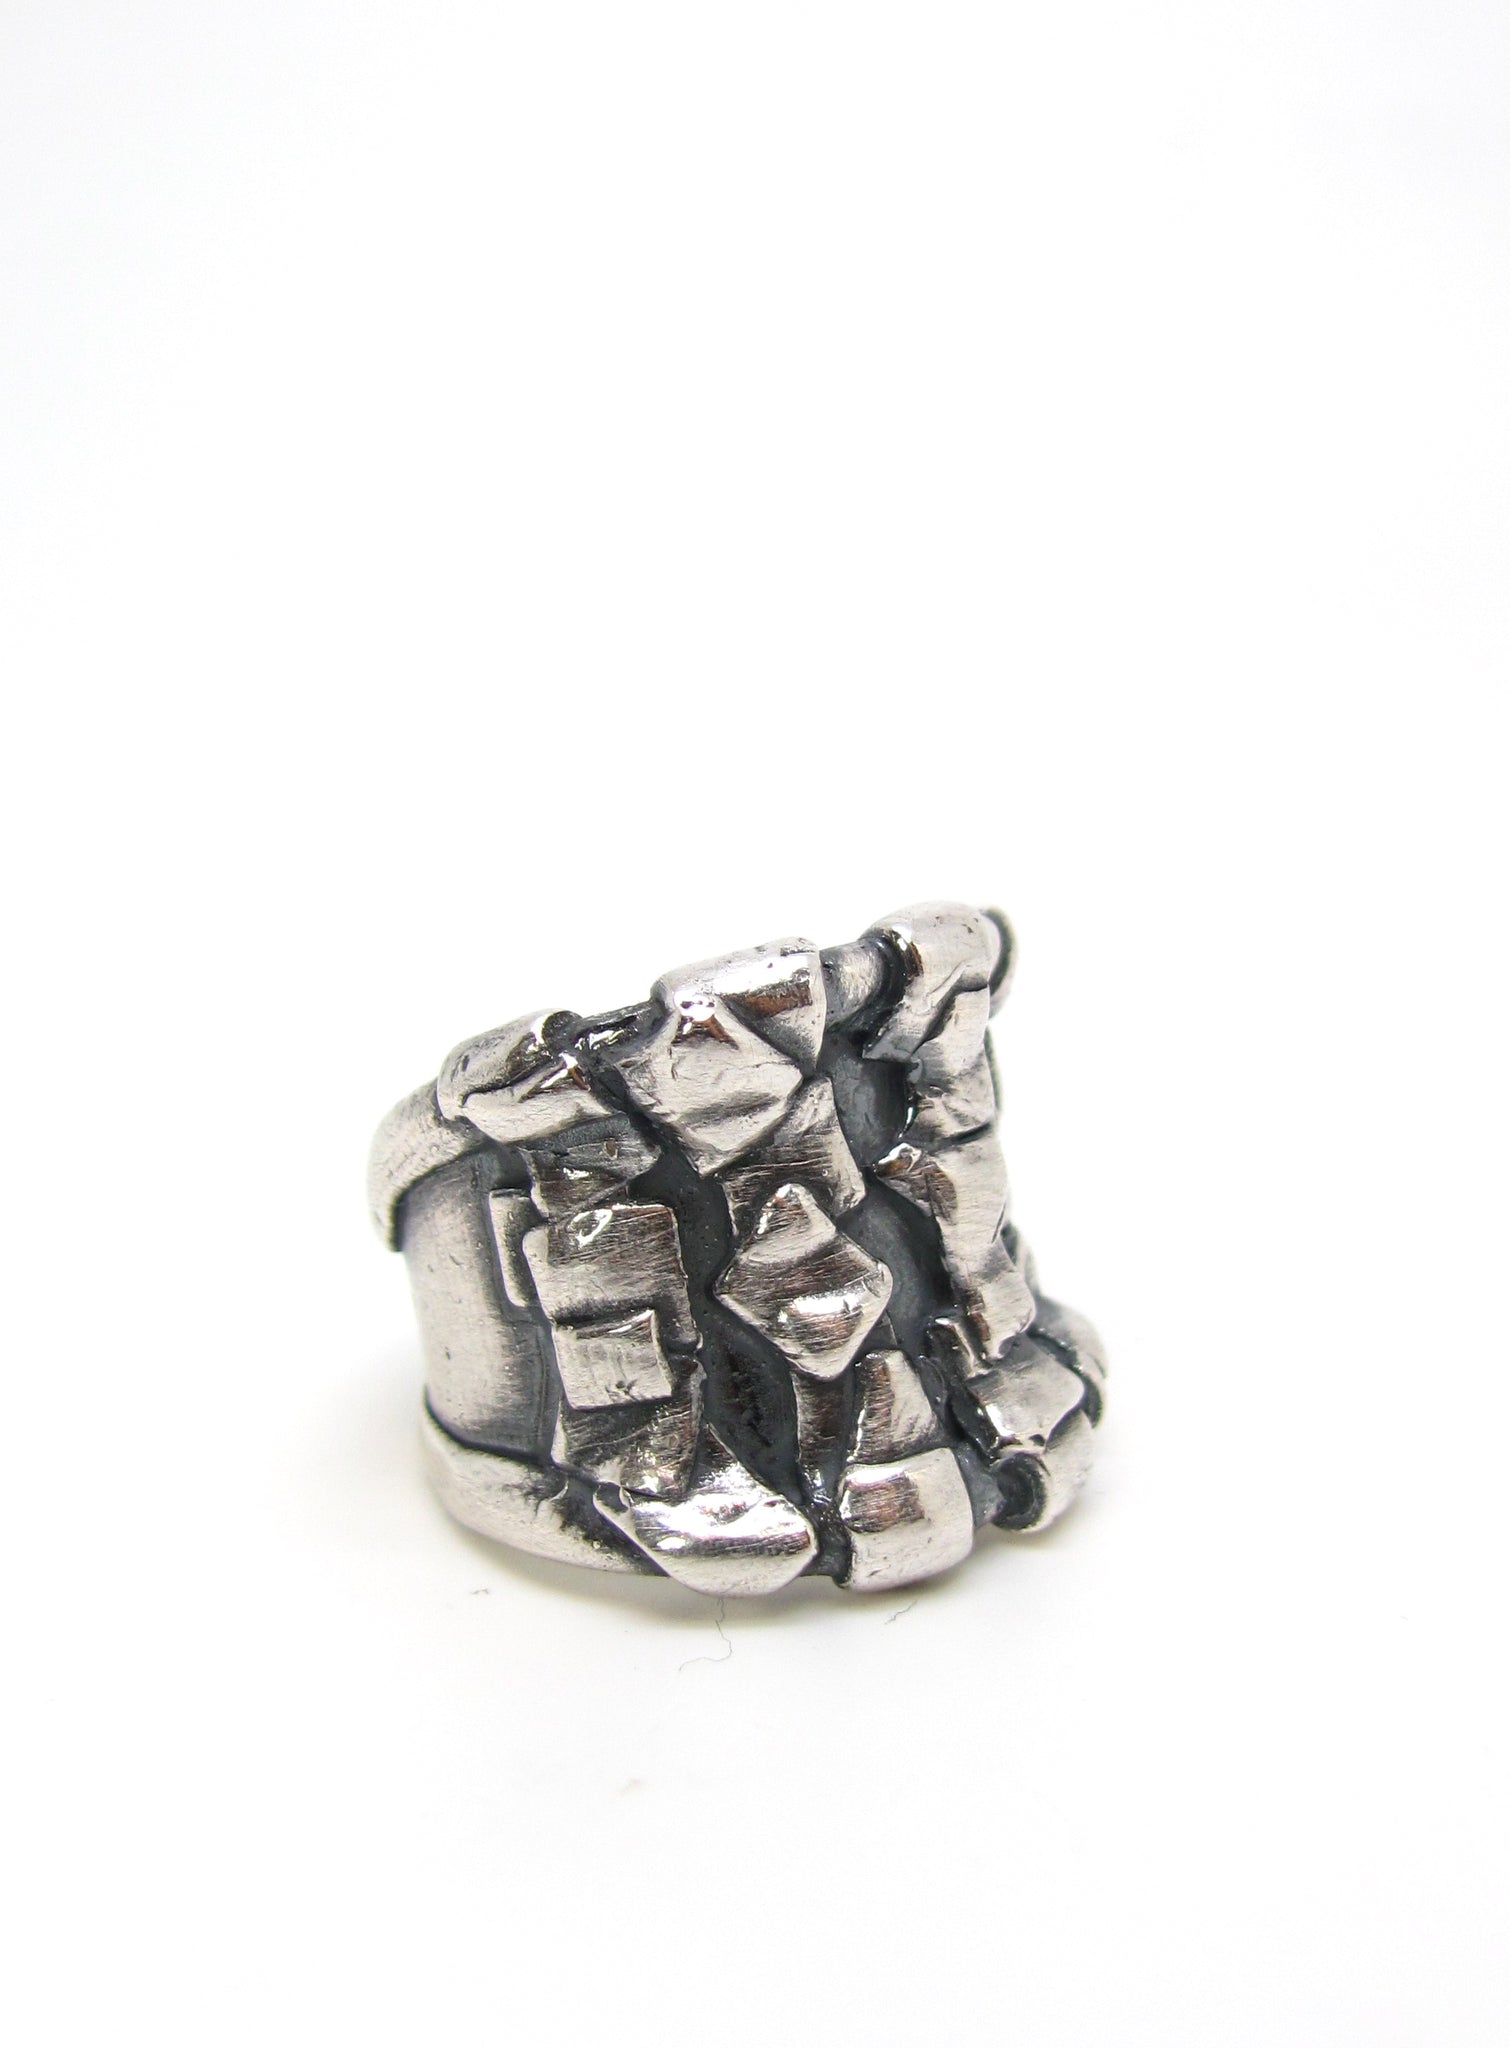 The Woven Patchwork Ring